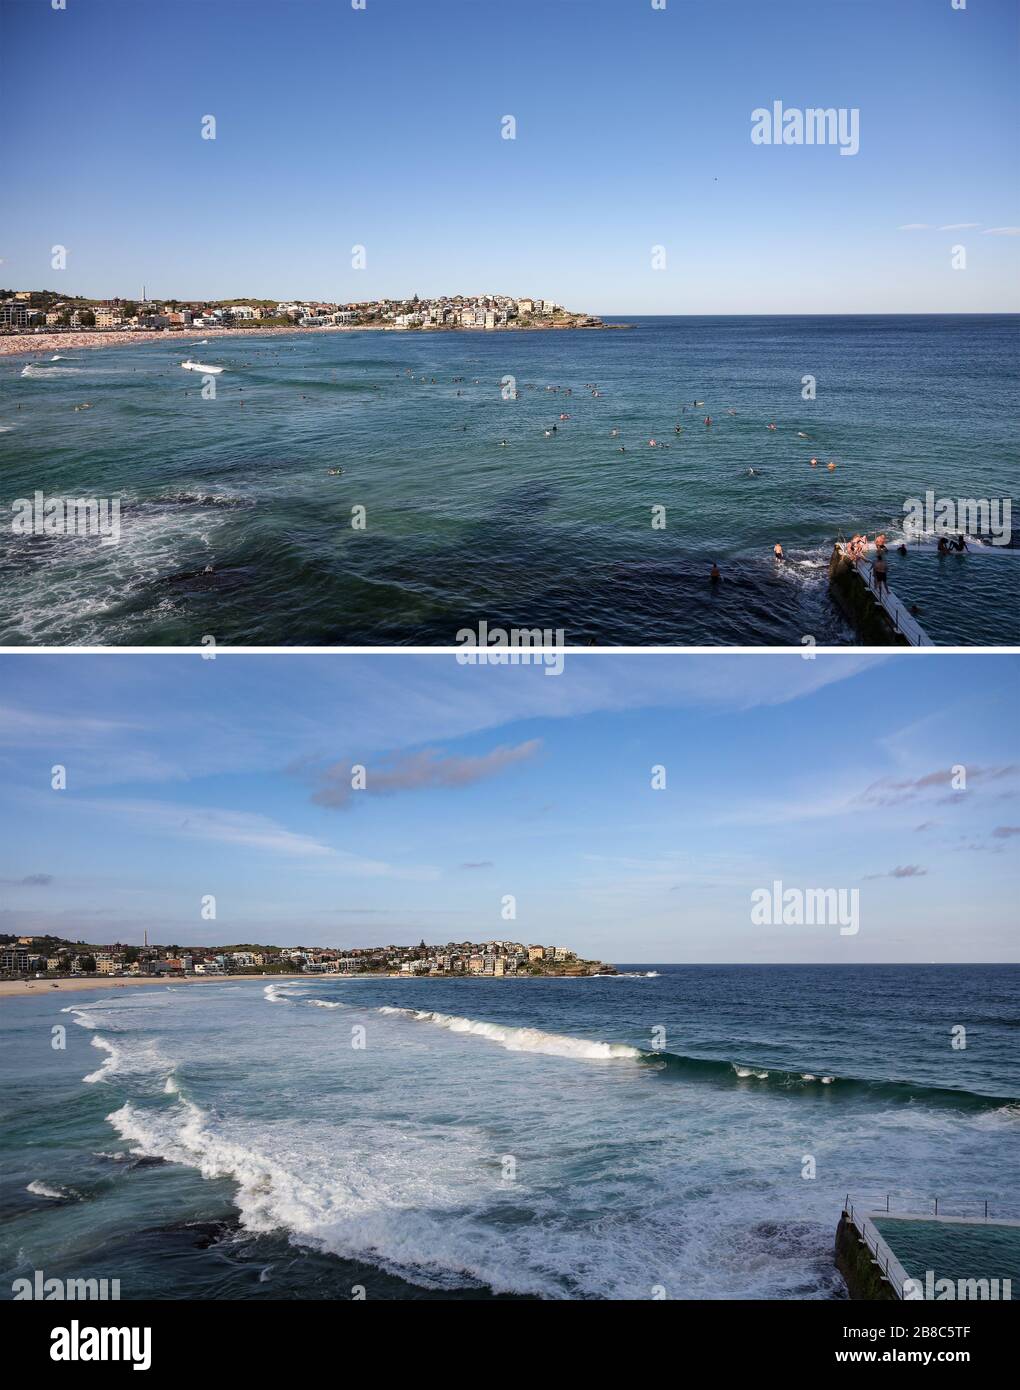 (200321) -- SYDNEY, March 21, 2020 (Xinhua) -- The combo photo shows people swimming in the sea at the Bondi Beach on March 20, 2020 (up) and the empty swimming area of the closed Bondi Beach on March 21, 2020 in Sydney, Australia. Australia's iconic Bondi Beach was closed after hundreds of beachgoers crowded on the sand on Friday ignoring the ongoing social distancing guidelines. Police Minister of the State of New South Wales David Elliott ordered the beach in Sydney to be shut down on Saturday afternoon. There have been 874 confirmed cases of COVID-19 in Australia as of 6:30 a.m. local tim Stock Photo